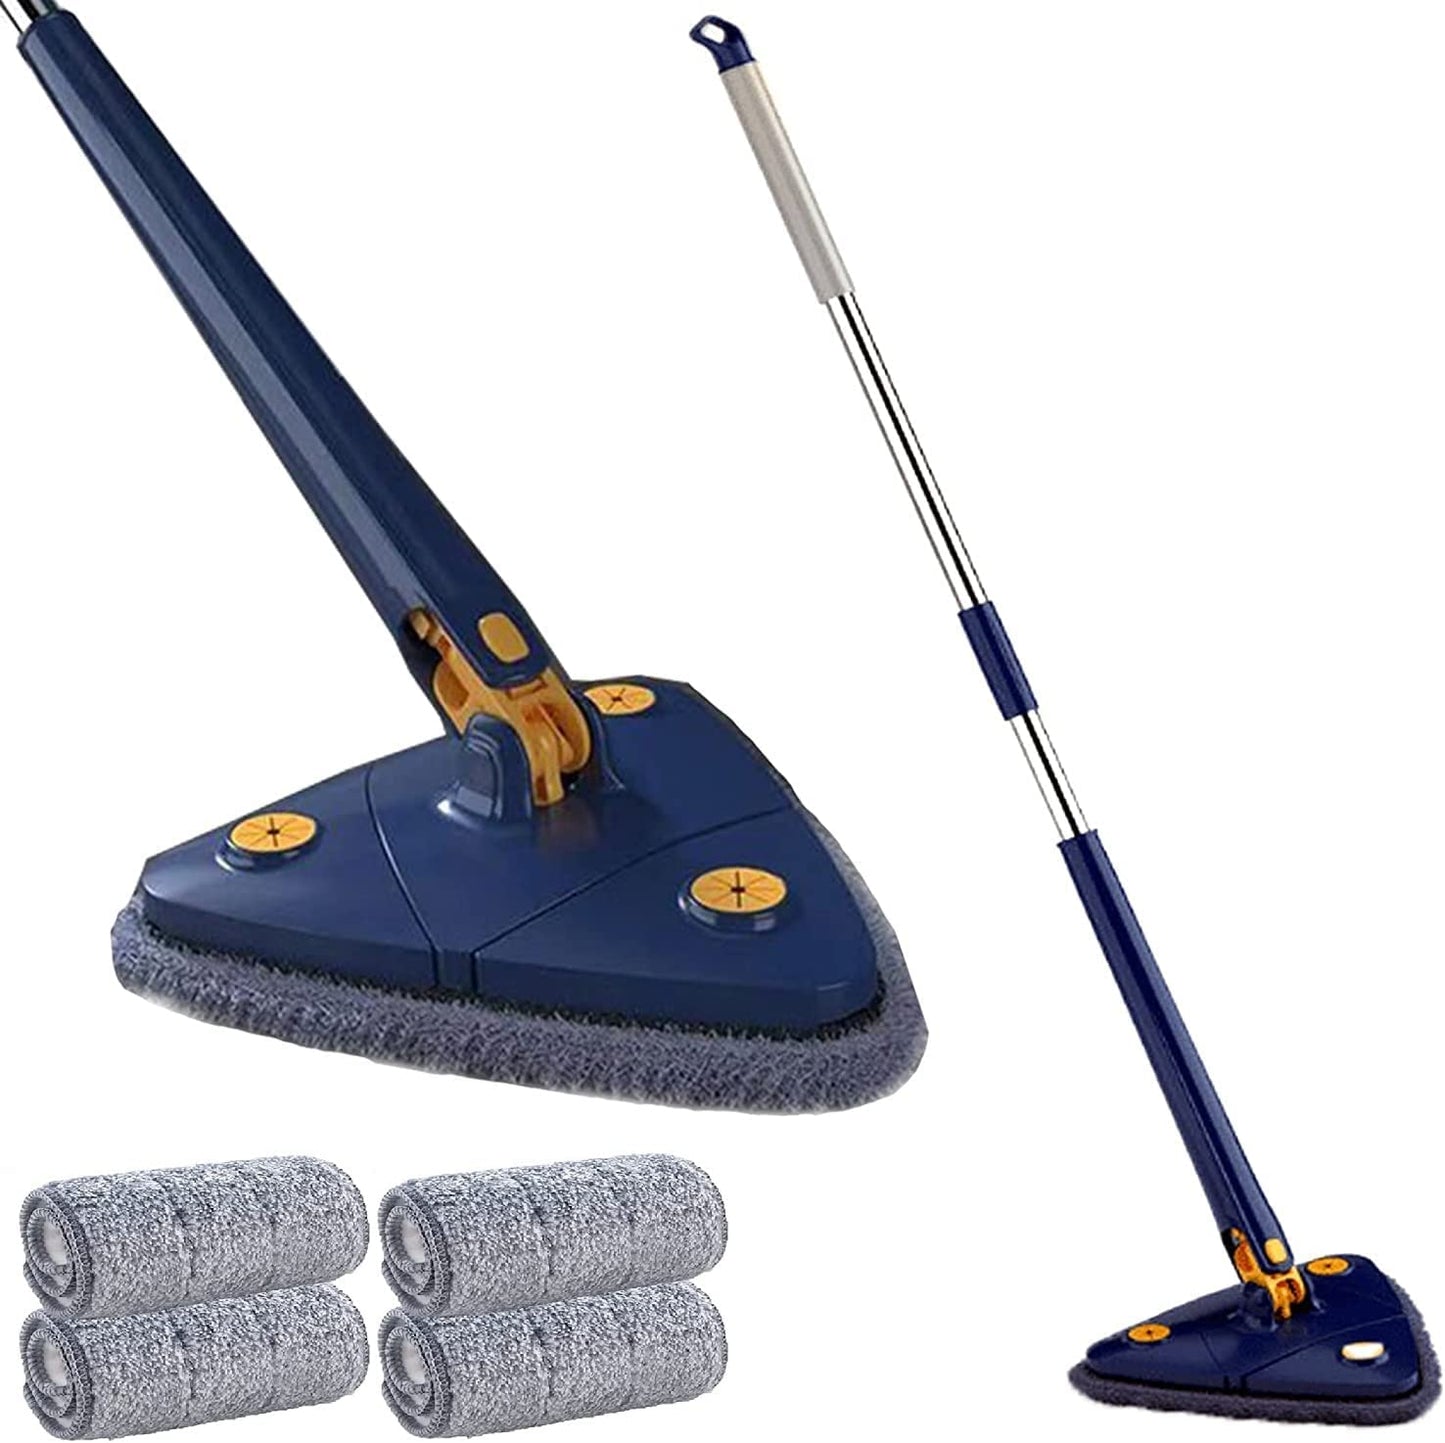 SqueezeMop™ | Cleaning made easy! – Stateside Treasures